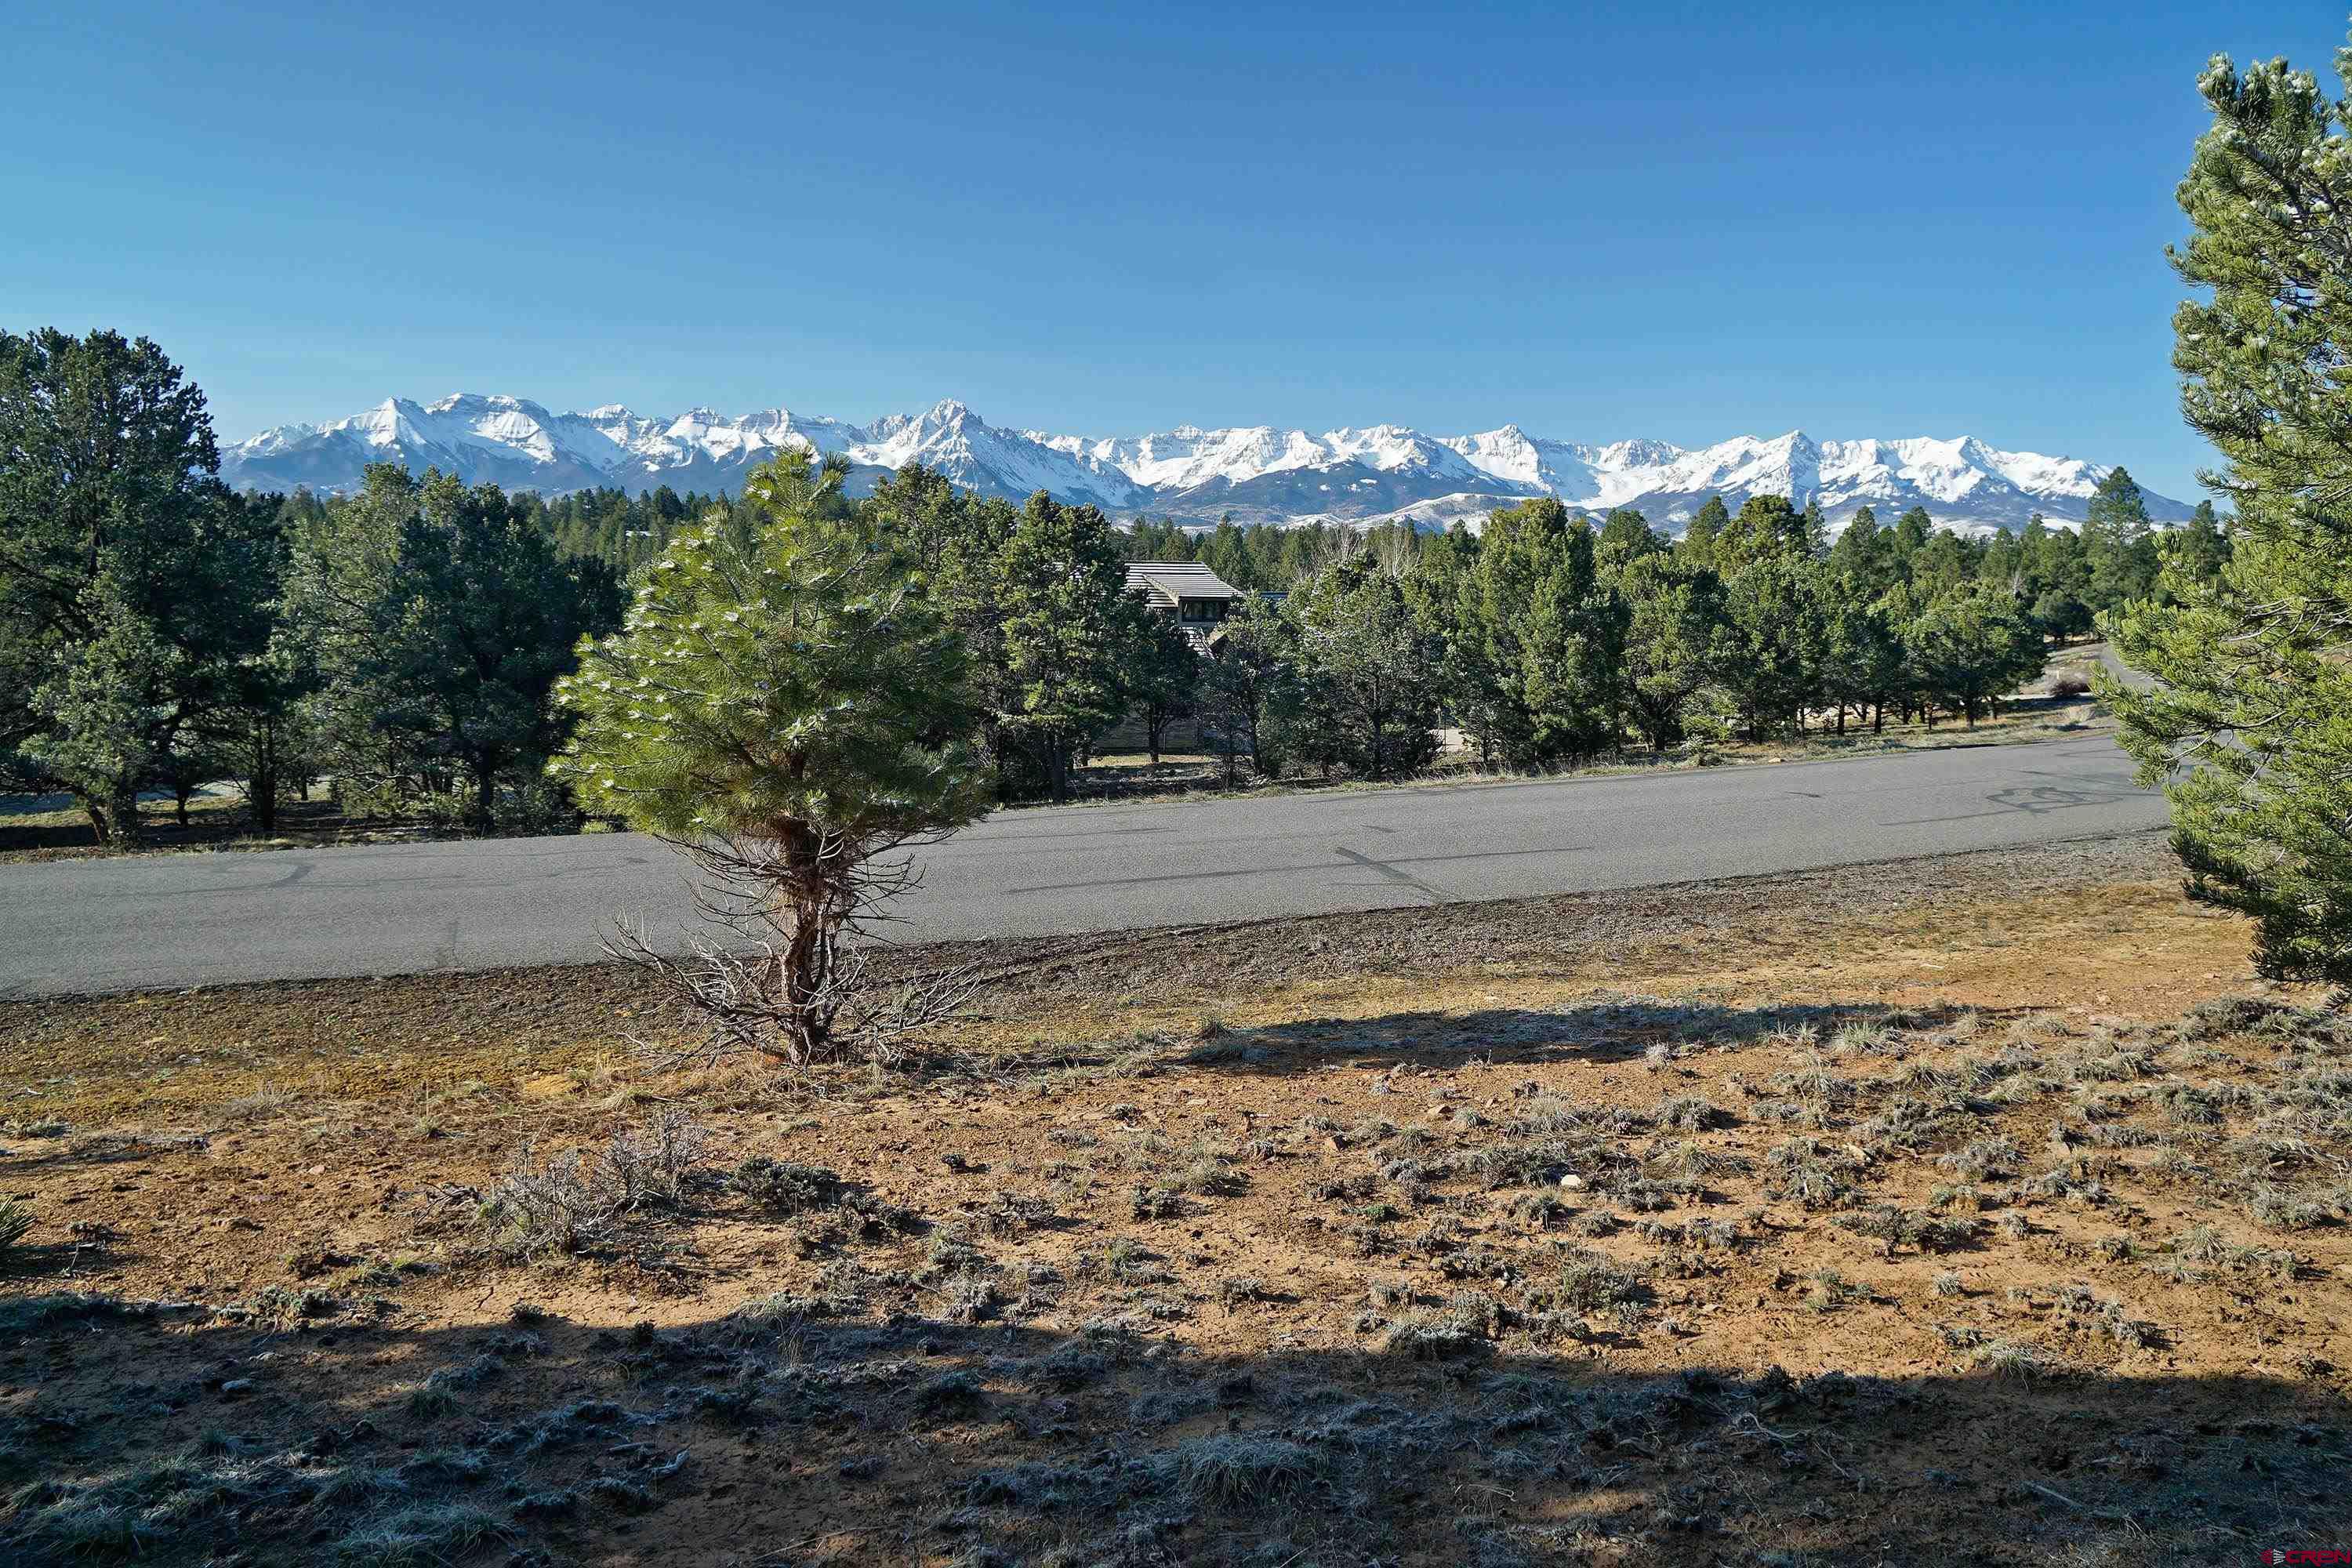 Undoubtedly one of the best view lots in the entire county at anywhere near this price! Level lot with the soil tests for foundation/septic already completed.  All photos were taken from ground level with no deceptive drone views.  With proper HOA approved tree removal/trimming, you can have almost unobstructed views of the San Juan range, including Mt. Sneffels, from the first level!  A second story would take the views to an insane viewing experience.  High speed fiber optic internet from Clearnetworx is in the road directly in front of the lot.  The Divide Ranch and Club golf course on Log Hill Mesa is one of the best kept secrets in Colorado. If you enjoy golf, beautiful scenery, outdoor activities, and friendly people, your search is over. Recreational activities abound in the area. Ridgway State Park which has great boating, fishing, and camping is located about 15 minutes away. Telluride and its exceptional skiing is a short 45 minute drive. The mountains are well known for their stunning vistas which can be reached by 4WD or hiking for the more adventurous. There is also biking, rafting, camping, fishing, hunting, and a host of other activities. Ridgway is still a small town with some of the friendliest people you will ever meet. There are plenty of great eating establishments, art galleries, and cultural activities to keep everyone entertained. Montrose is located only 30 minutes north which offers about anything you will ever need. They have one of the top rated regional hospitals in the country, regional airport, Home Depot, large grocery stores, Walmart, and numerous other national and local businesses. Founders level golf membership automatically transfers with the sale of the lot.